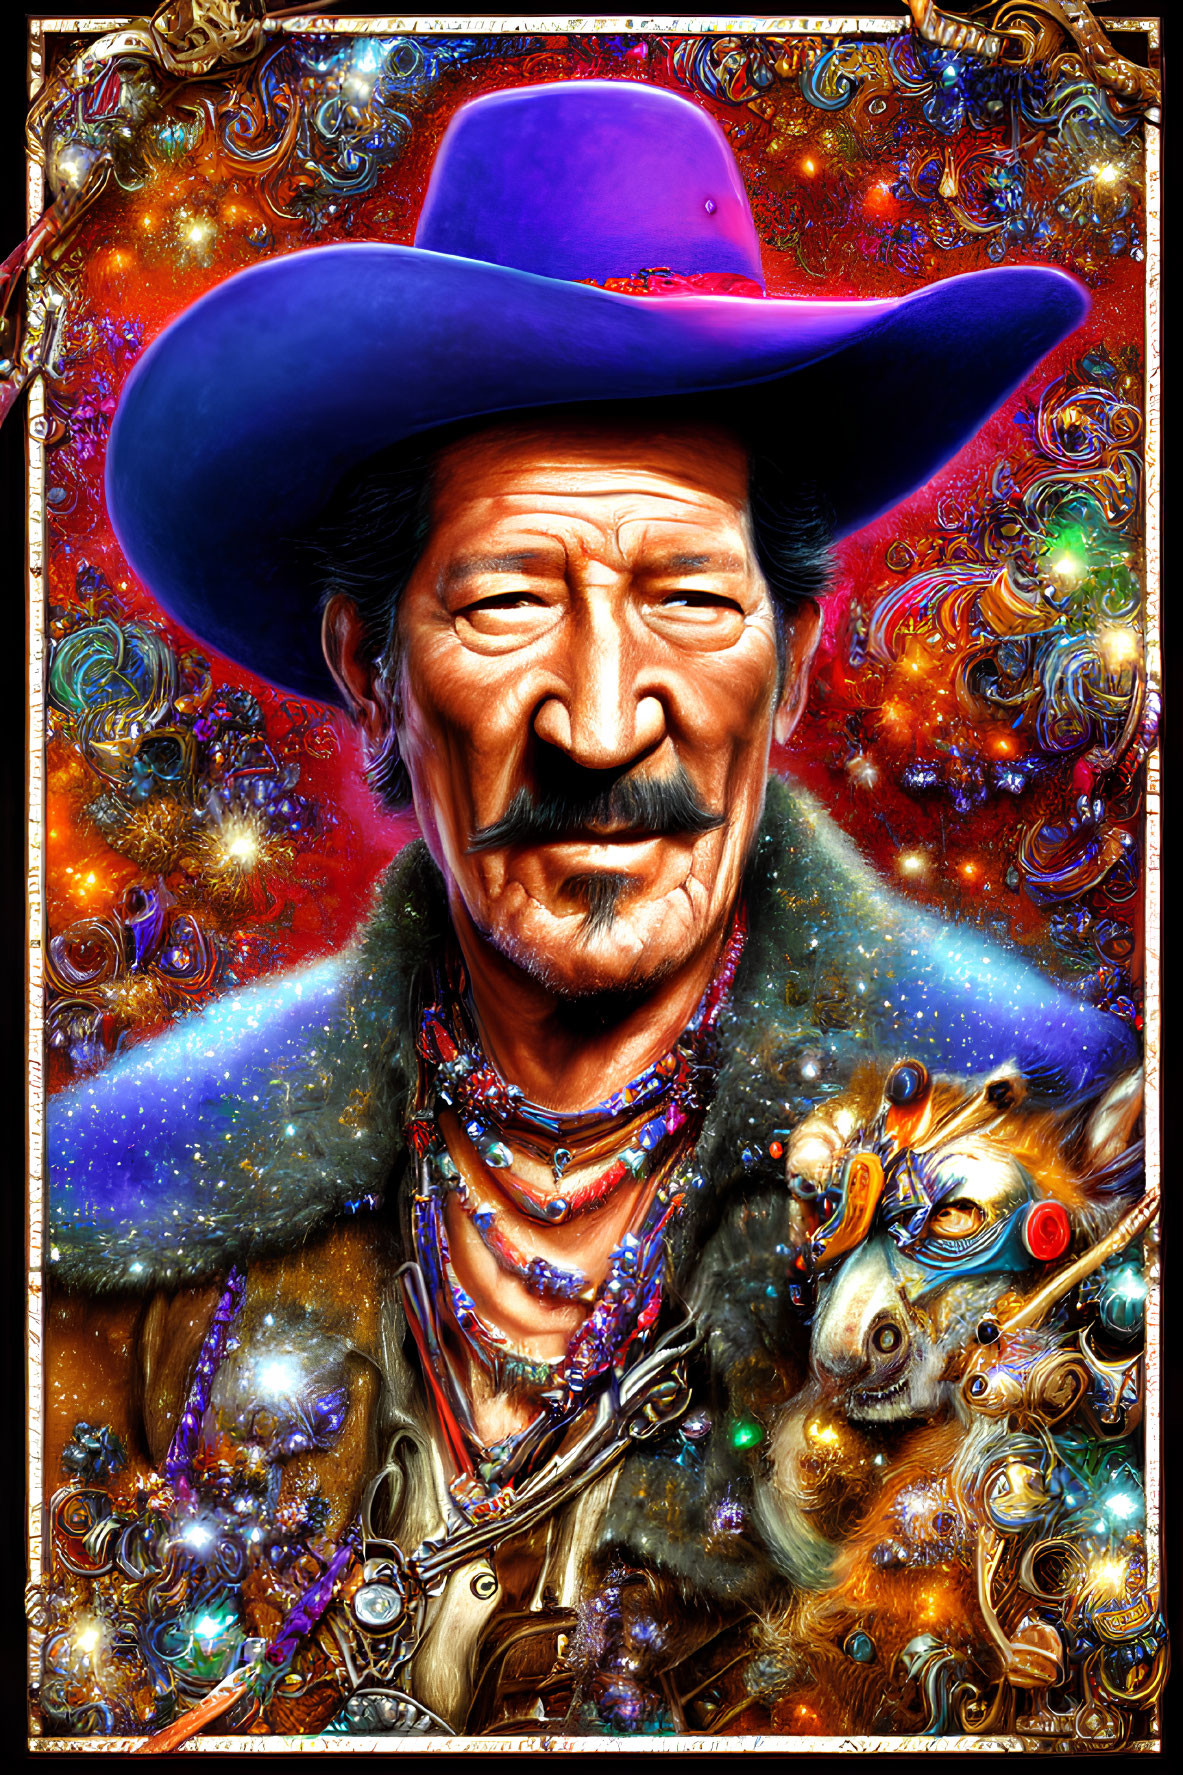 Colorful portrait of a man in purple hat and coat with cosmic background